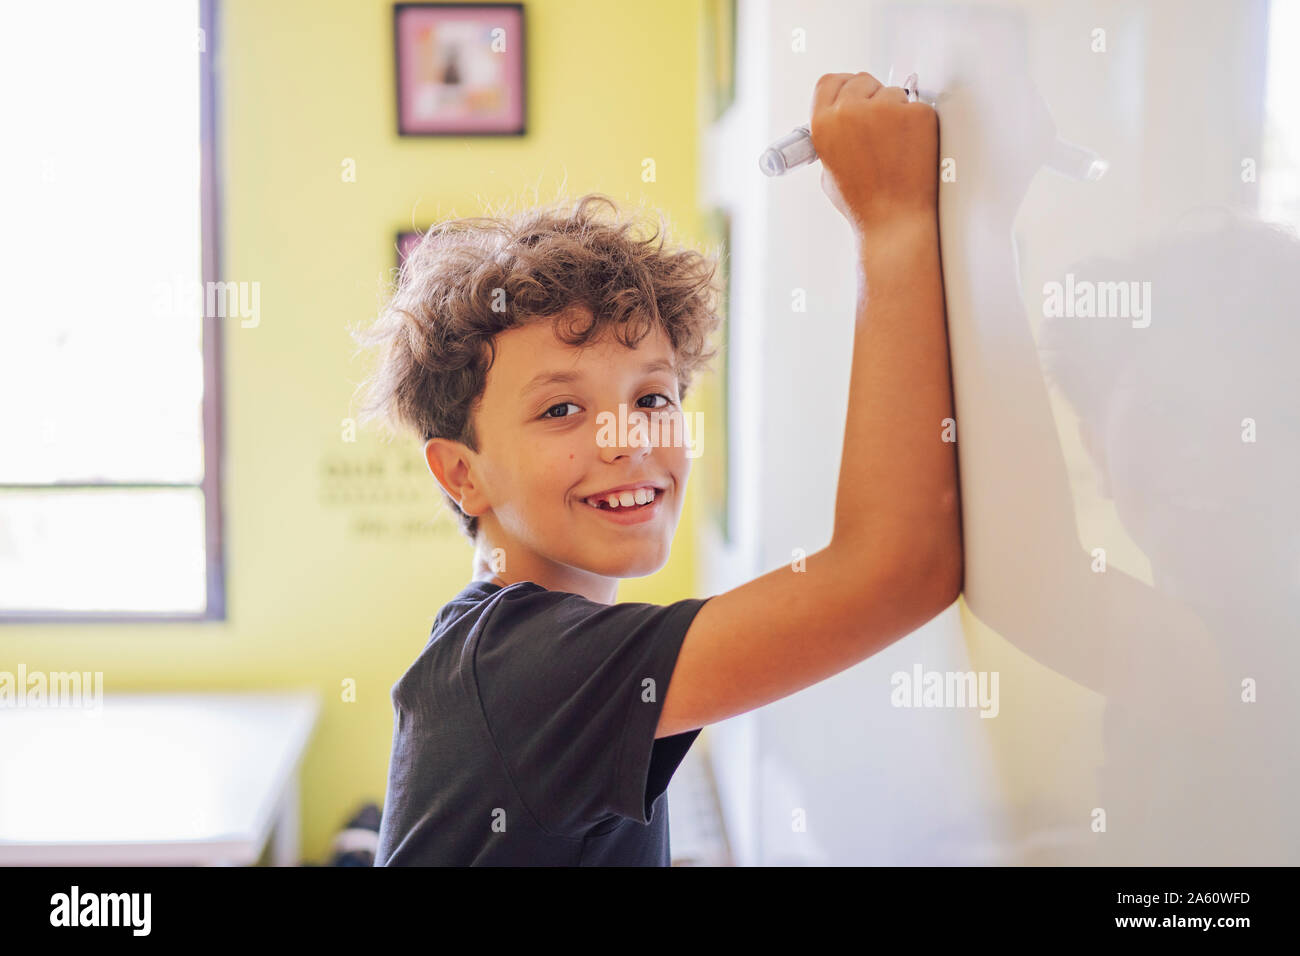 Portrait of smiling boy drawing on a whiteboard Stock Photo